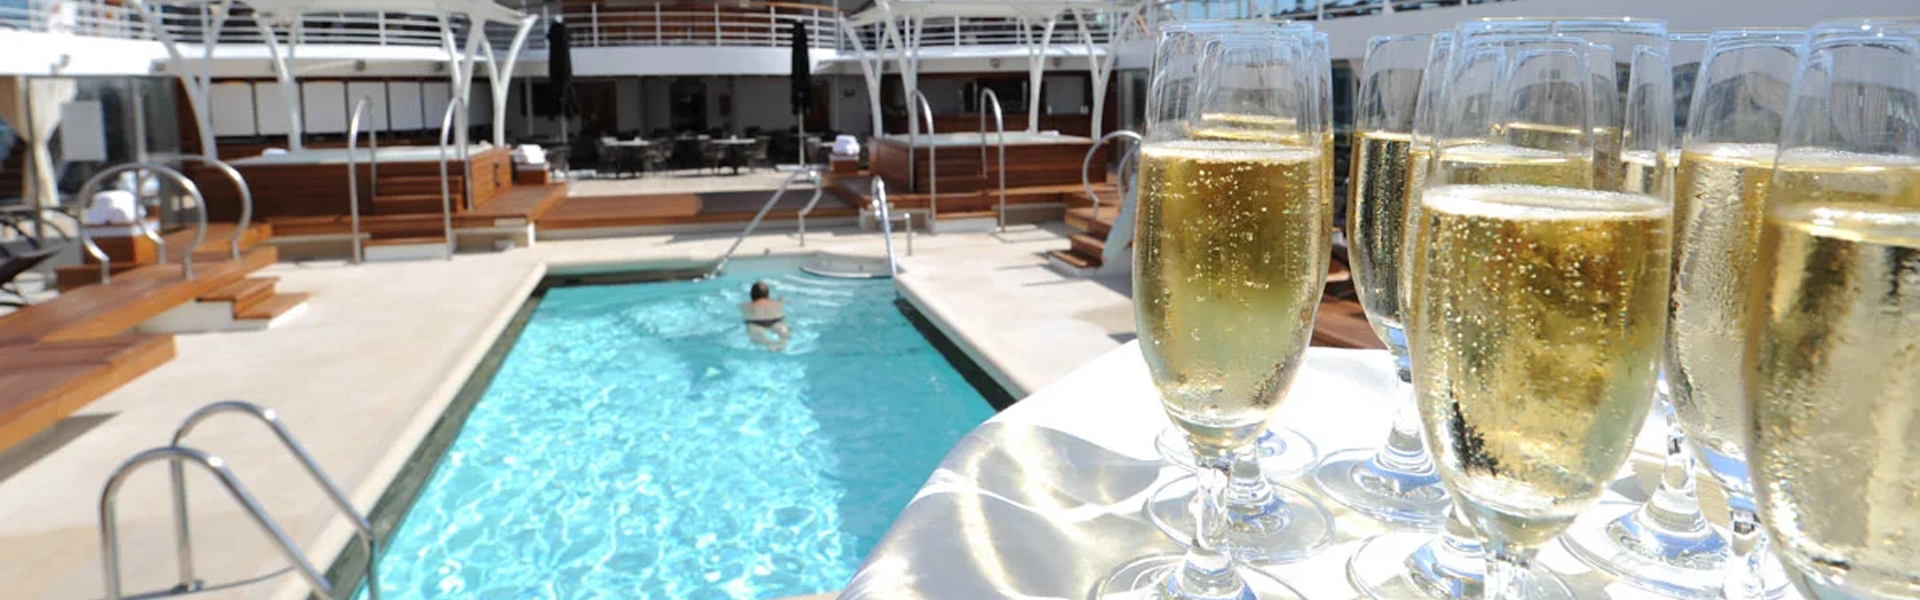 All-Inclusive Cruises in Suite with Seabourn